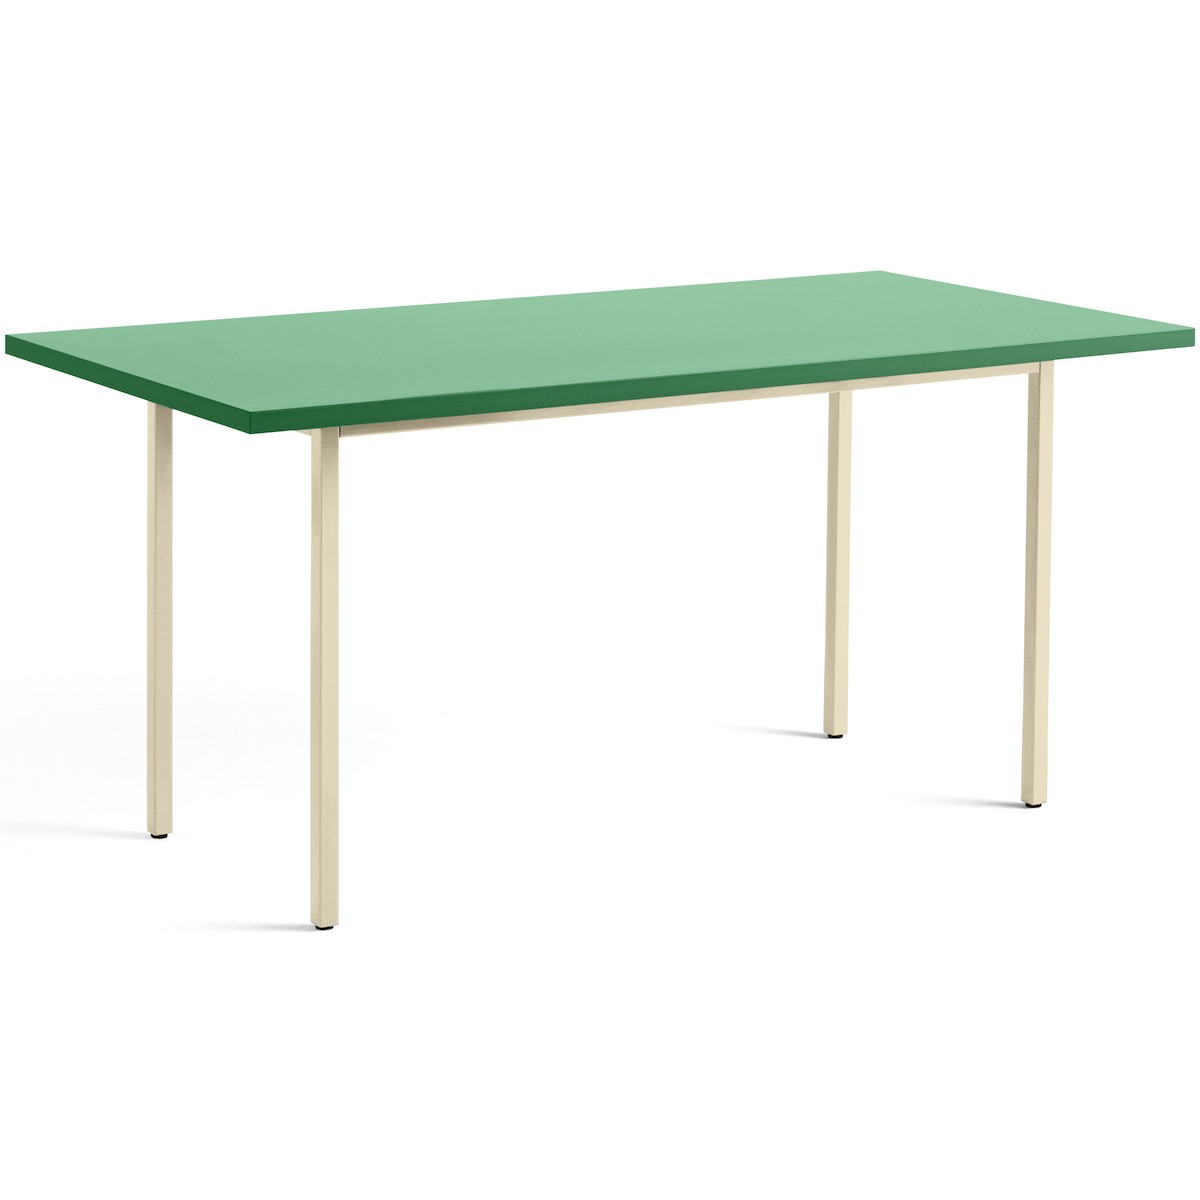 green / ivory - 160x82xH74 cm - TWO-COLOUR table